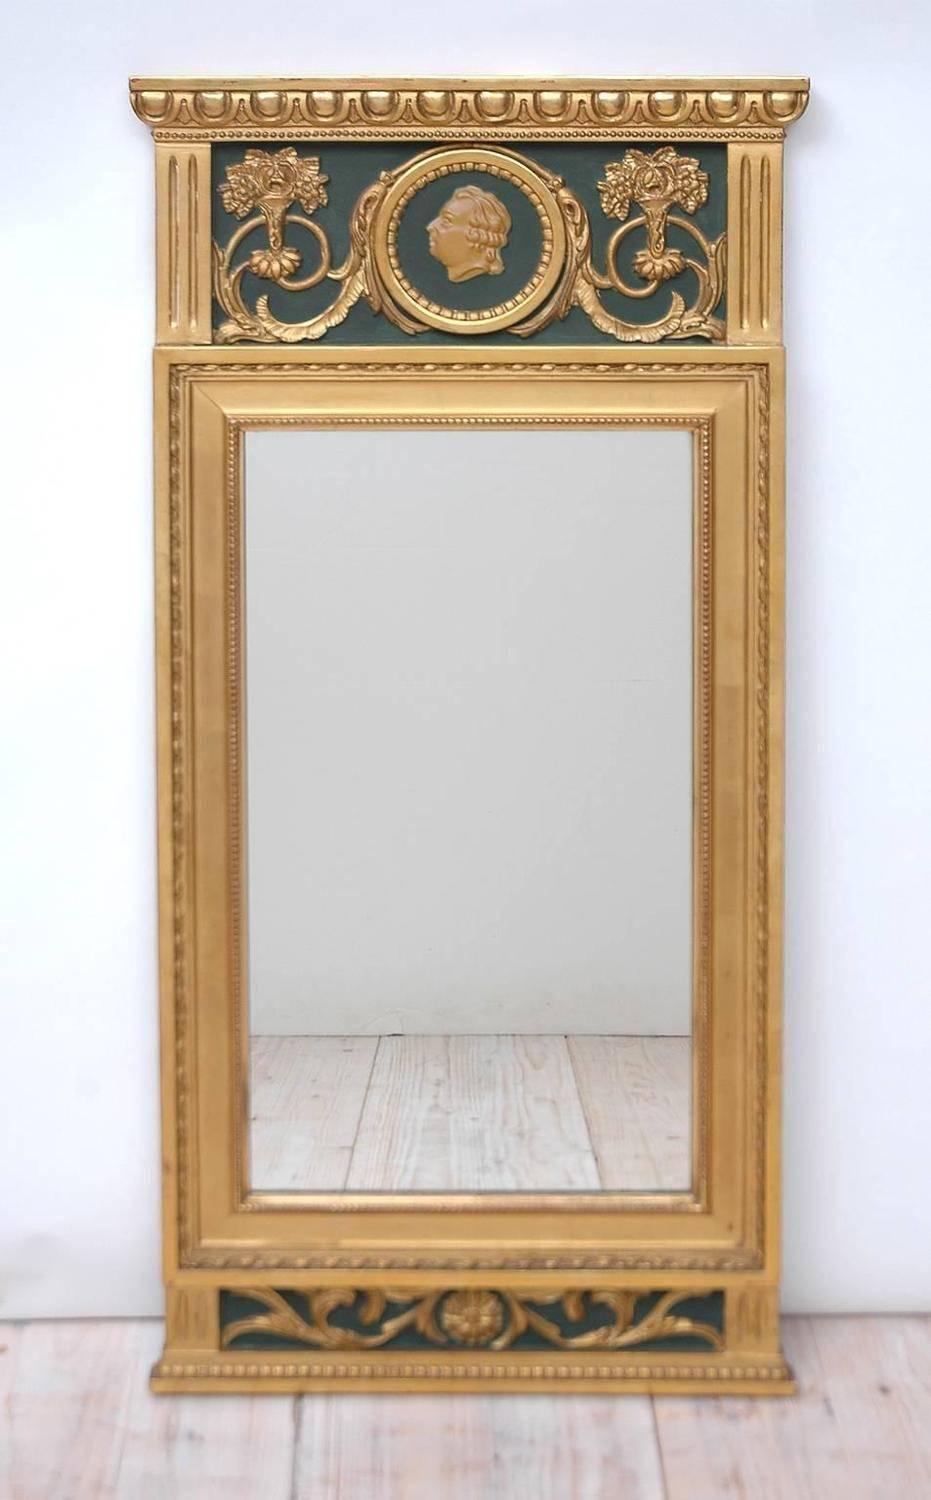 20th century Gustavian style mirror with gesso and carved wood with gold leaf applied.

Measures: 20 1/4